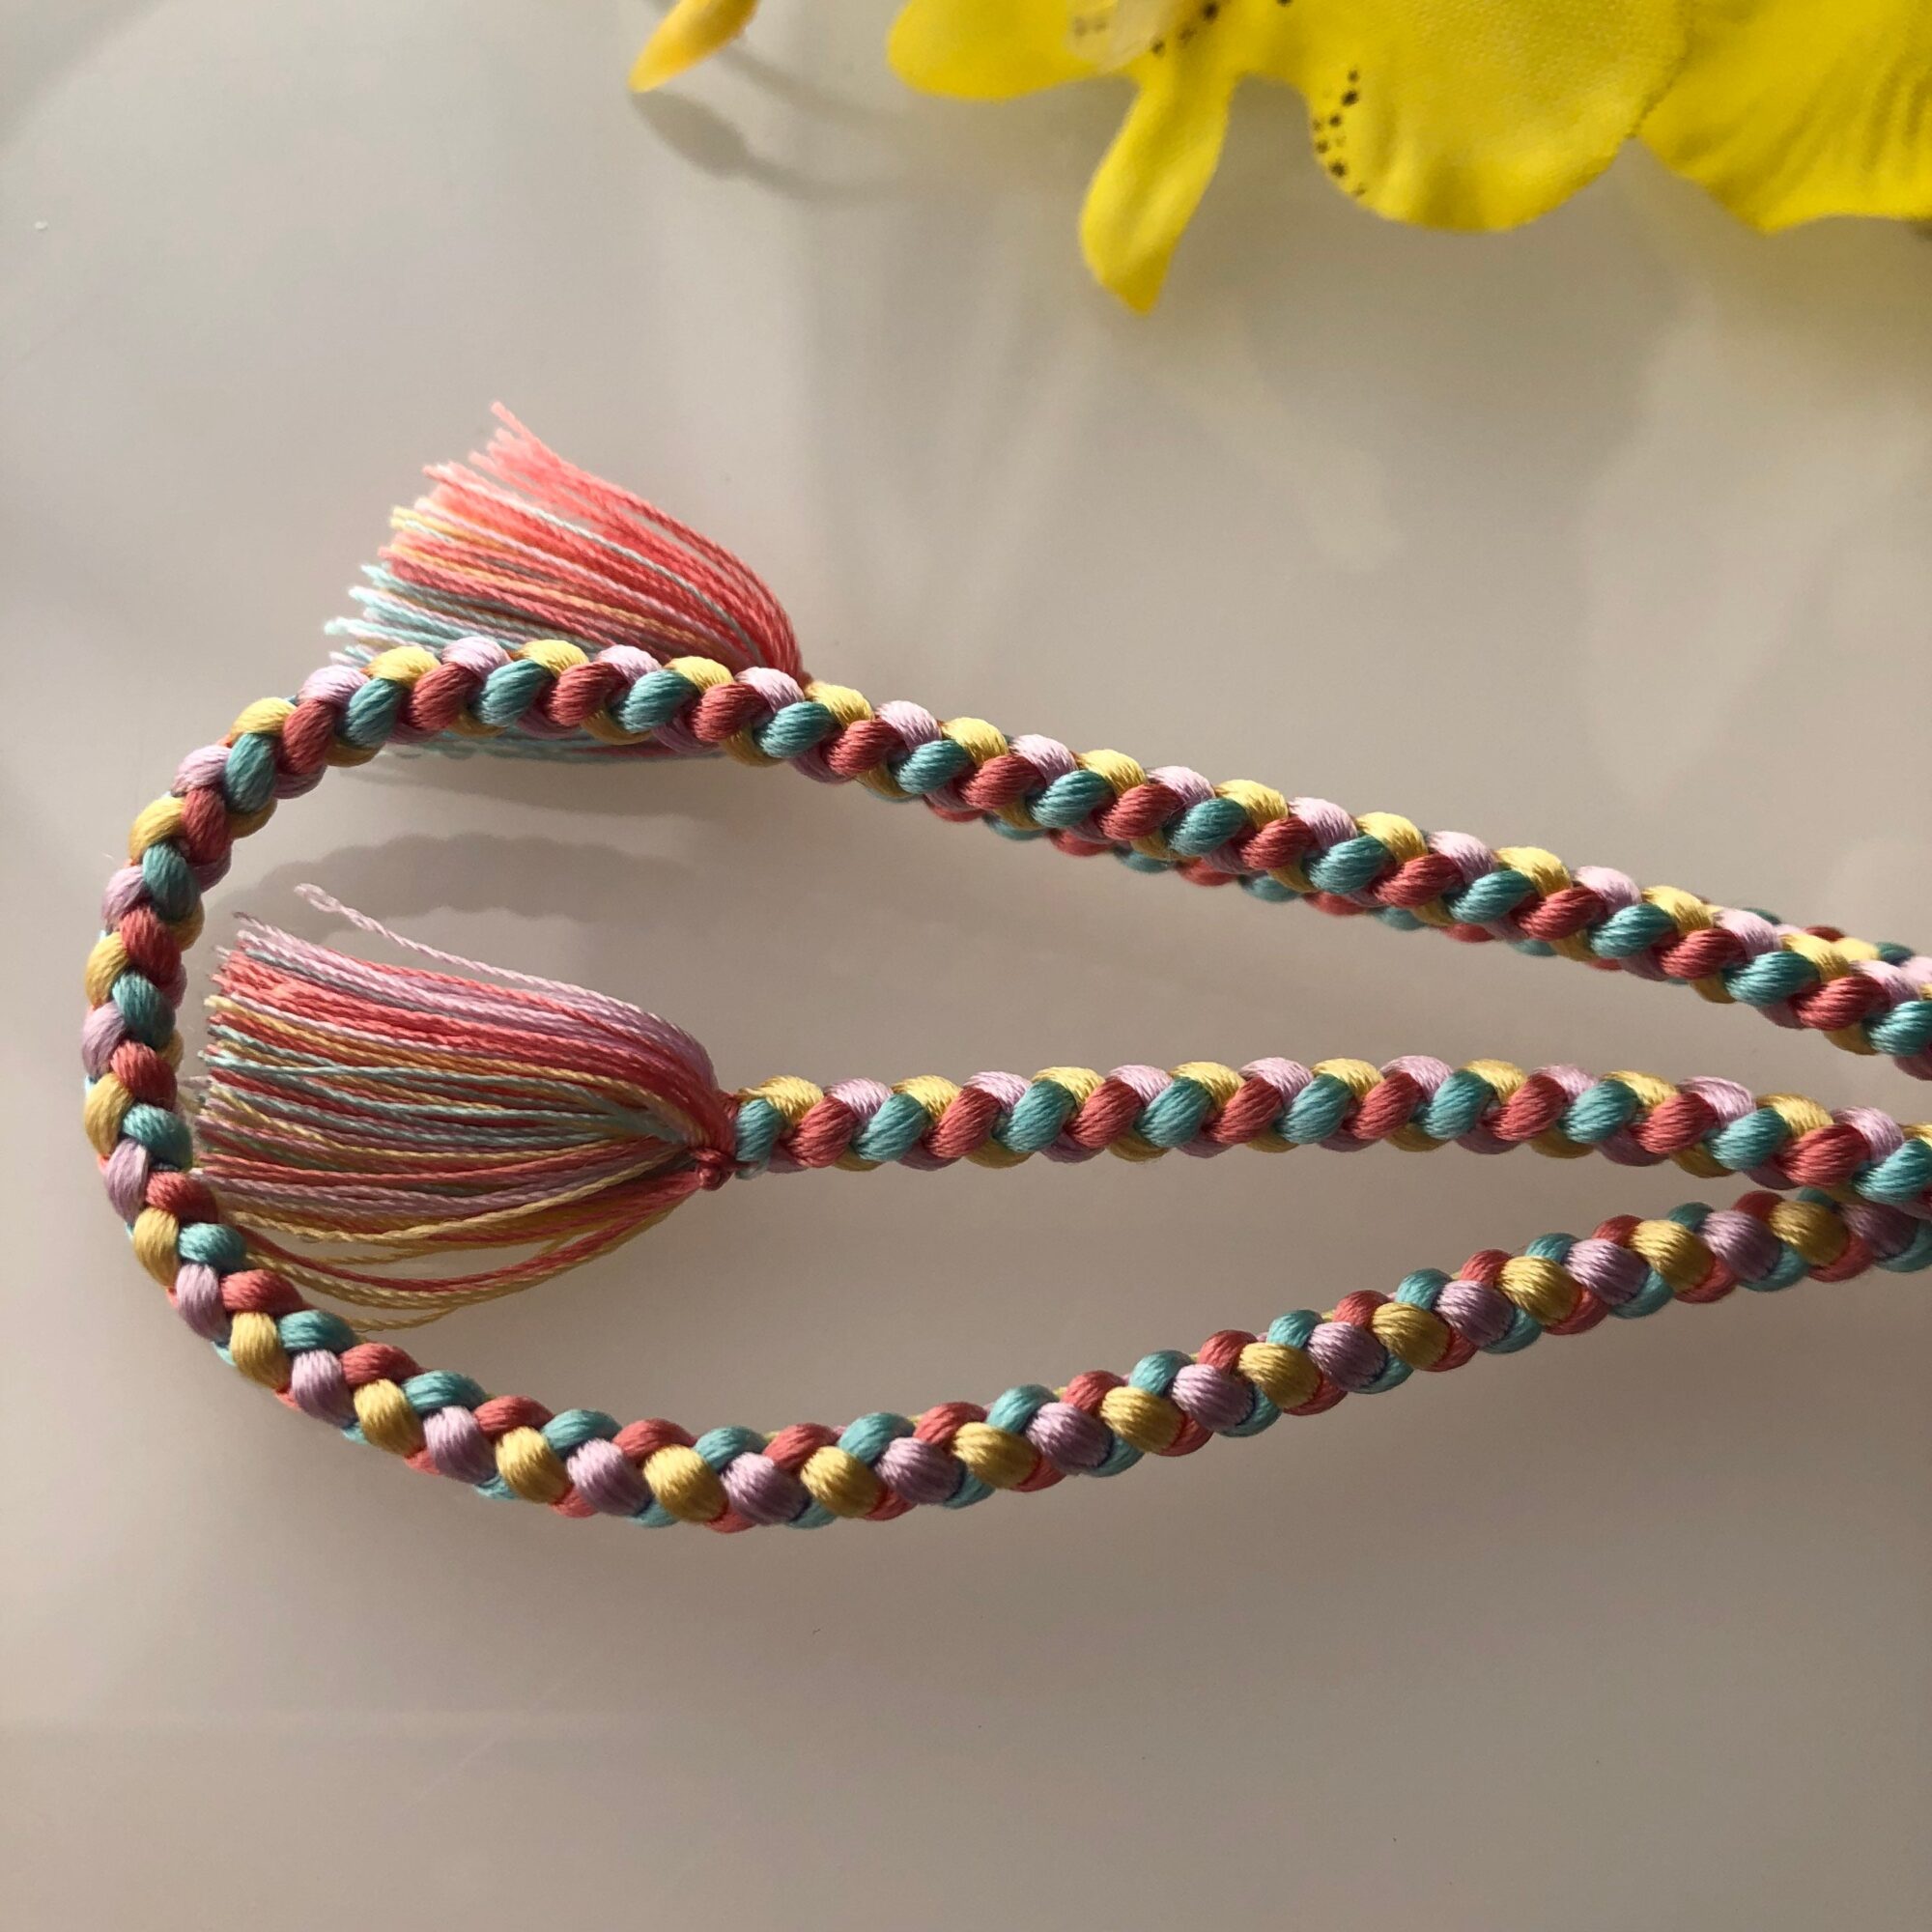 Kumihimo Braided Bracelet Rainbow Colored Silk Like Kumihimo Braided with Slip Knot Bracelet - Size at 7 Inches Round